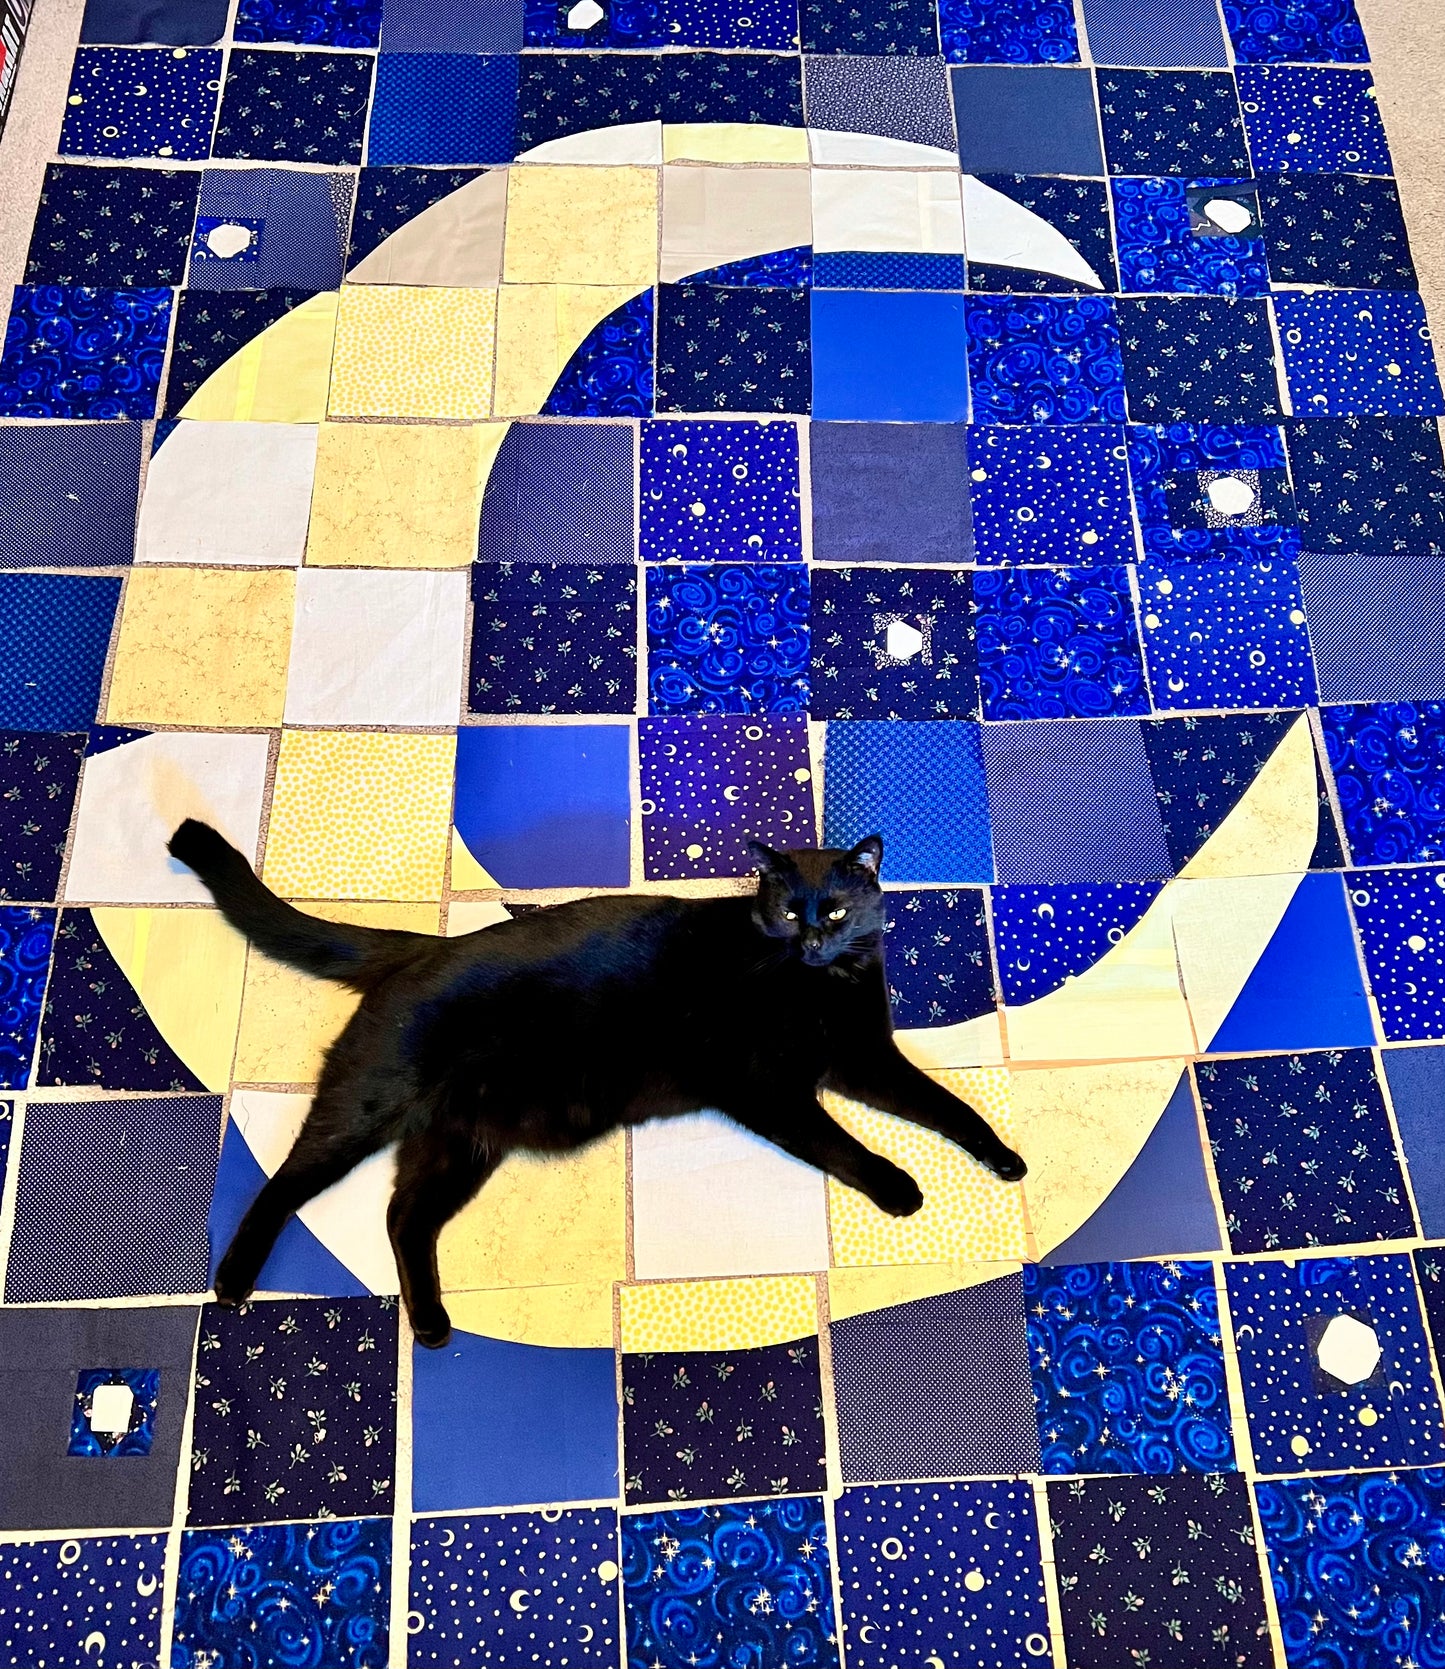 a work in progress, laying out the squares of the quilt, but a black cat lays across the pieces